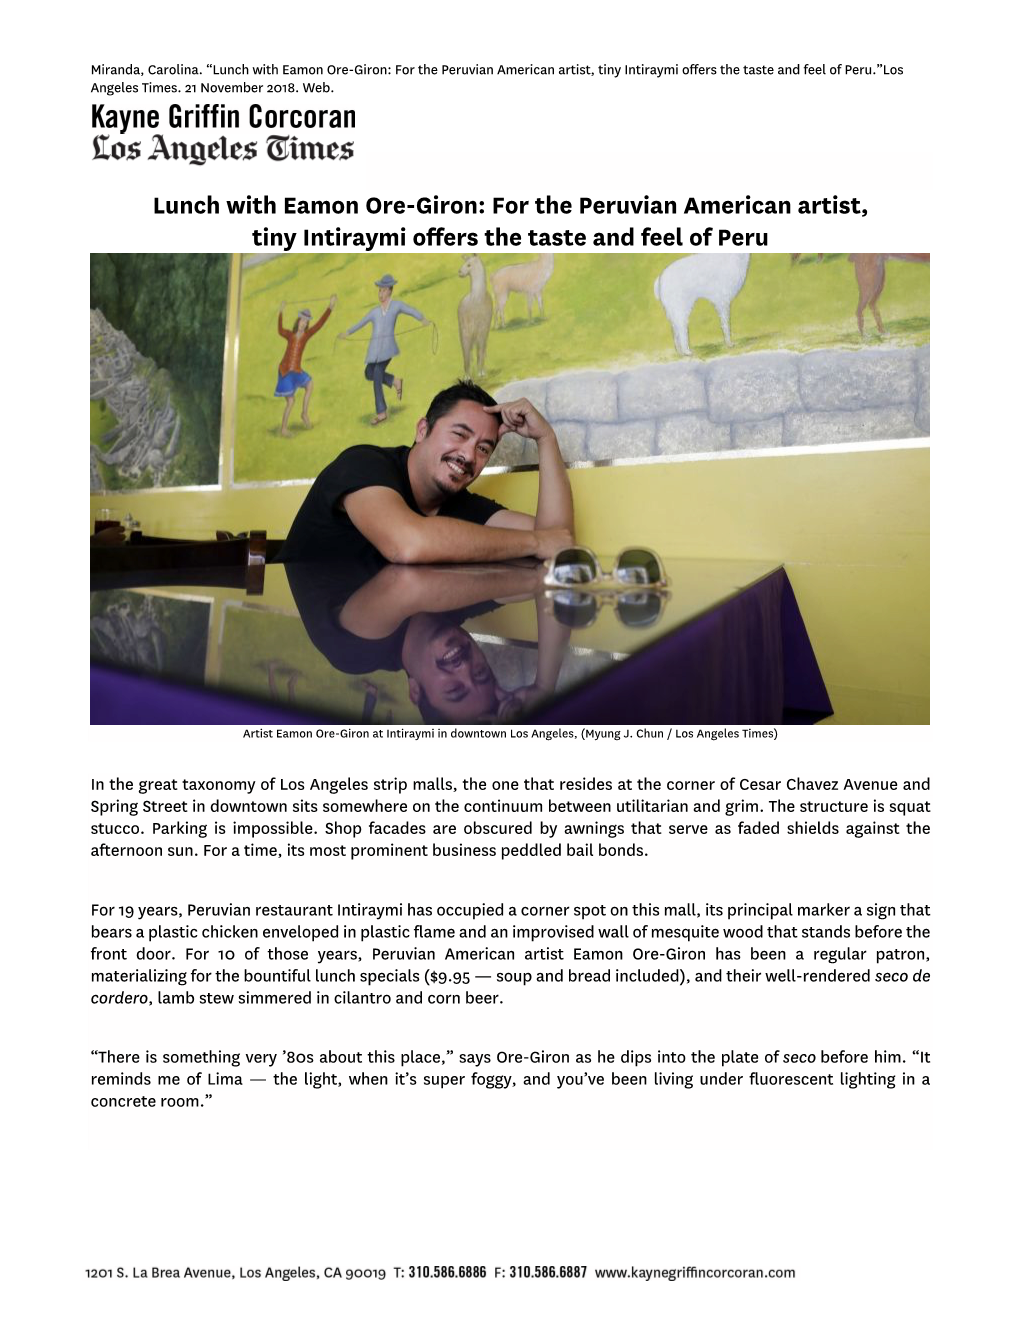 Lunch with Eamon Ore-Giron: for the Peruvian American Artist, Tiny Intiraymi Offers the Taste and Feel of Peru.”Los Angeles Times